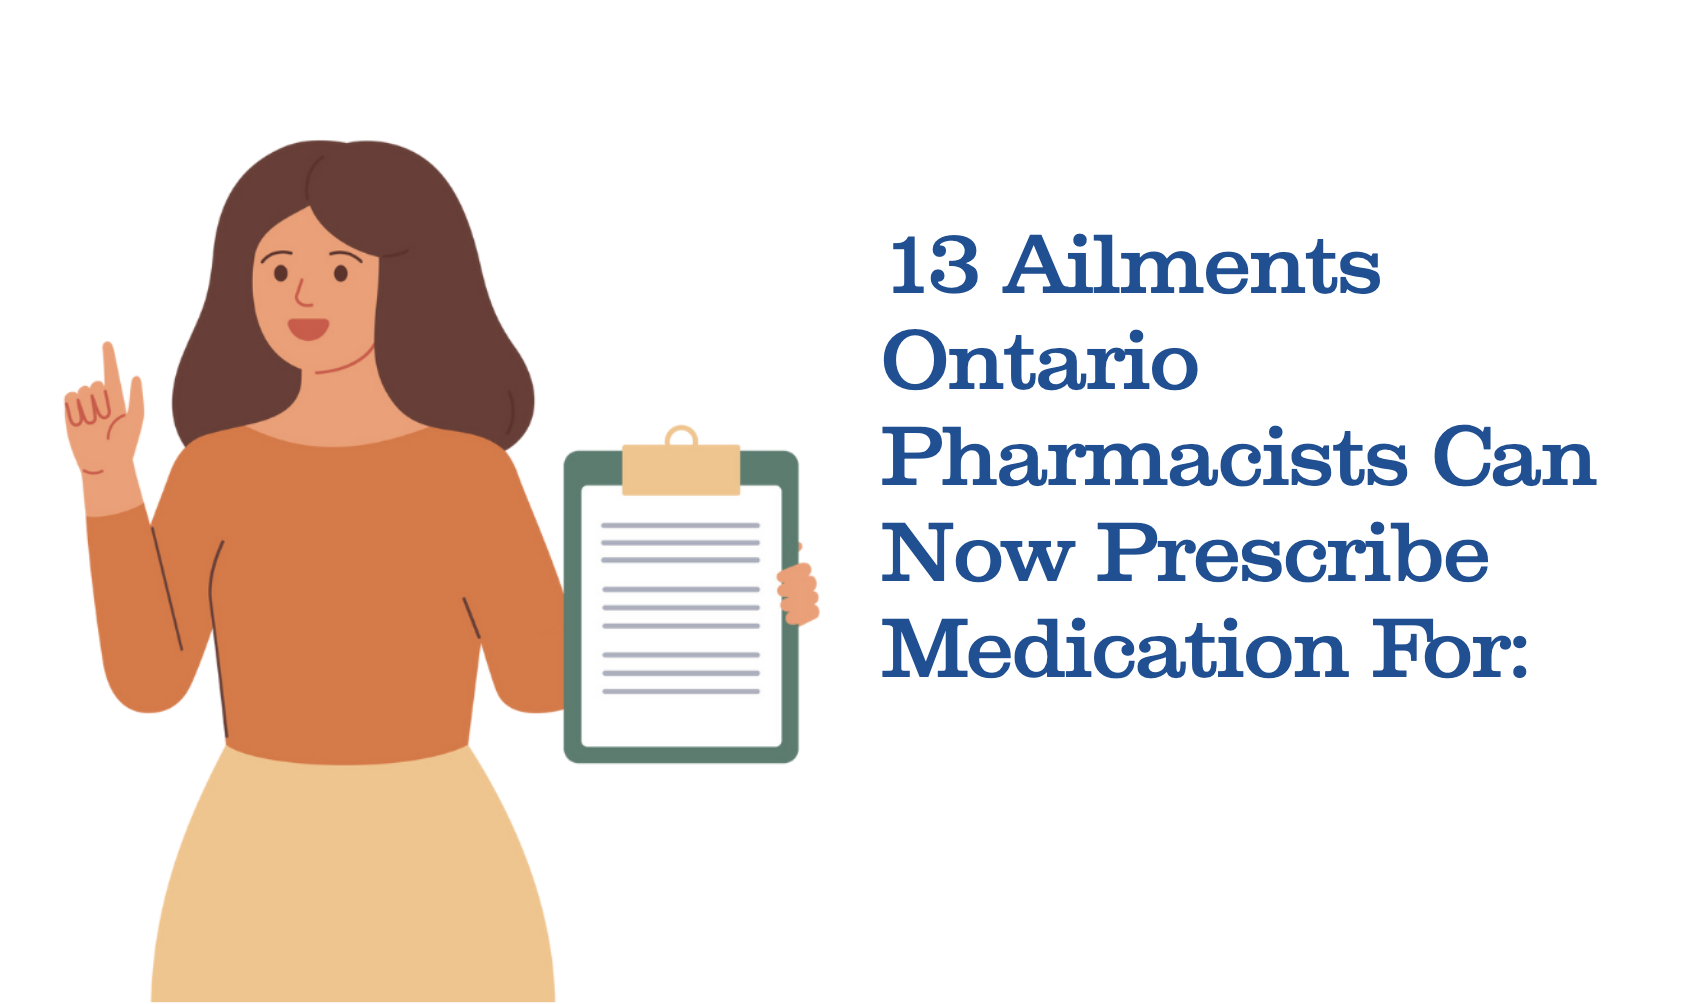 Graphic of a women holding a paper board with a text "13 Ailments Ontario Pharmacists Can now prescribe medication for"